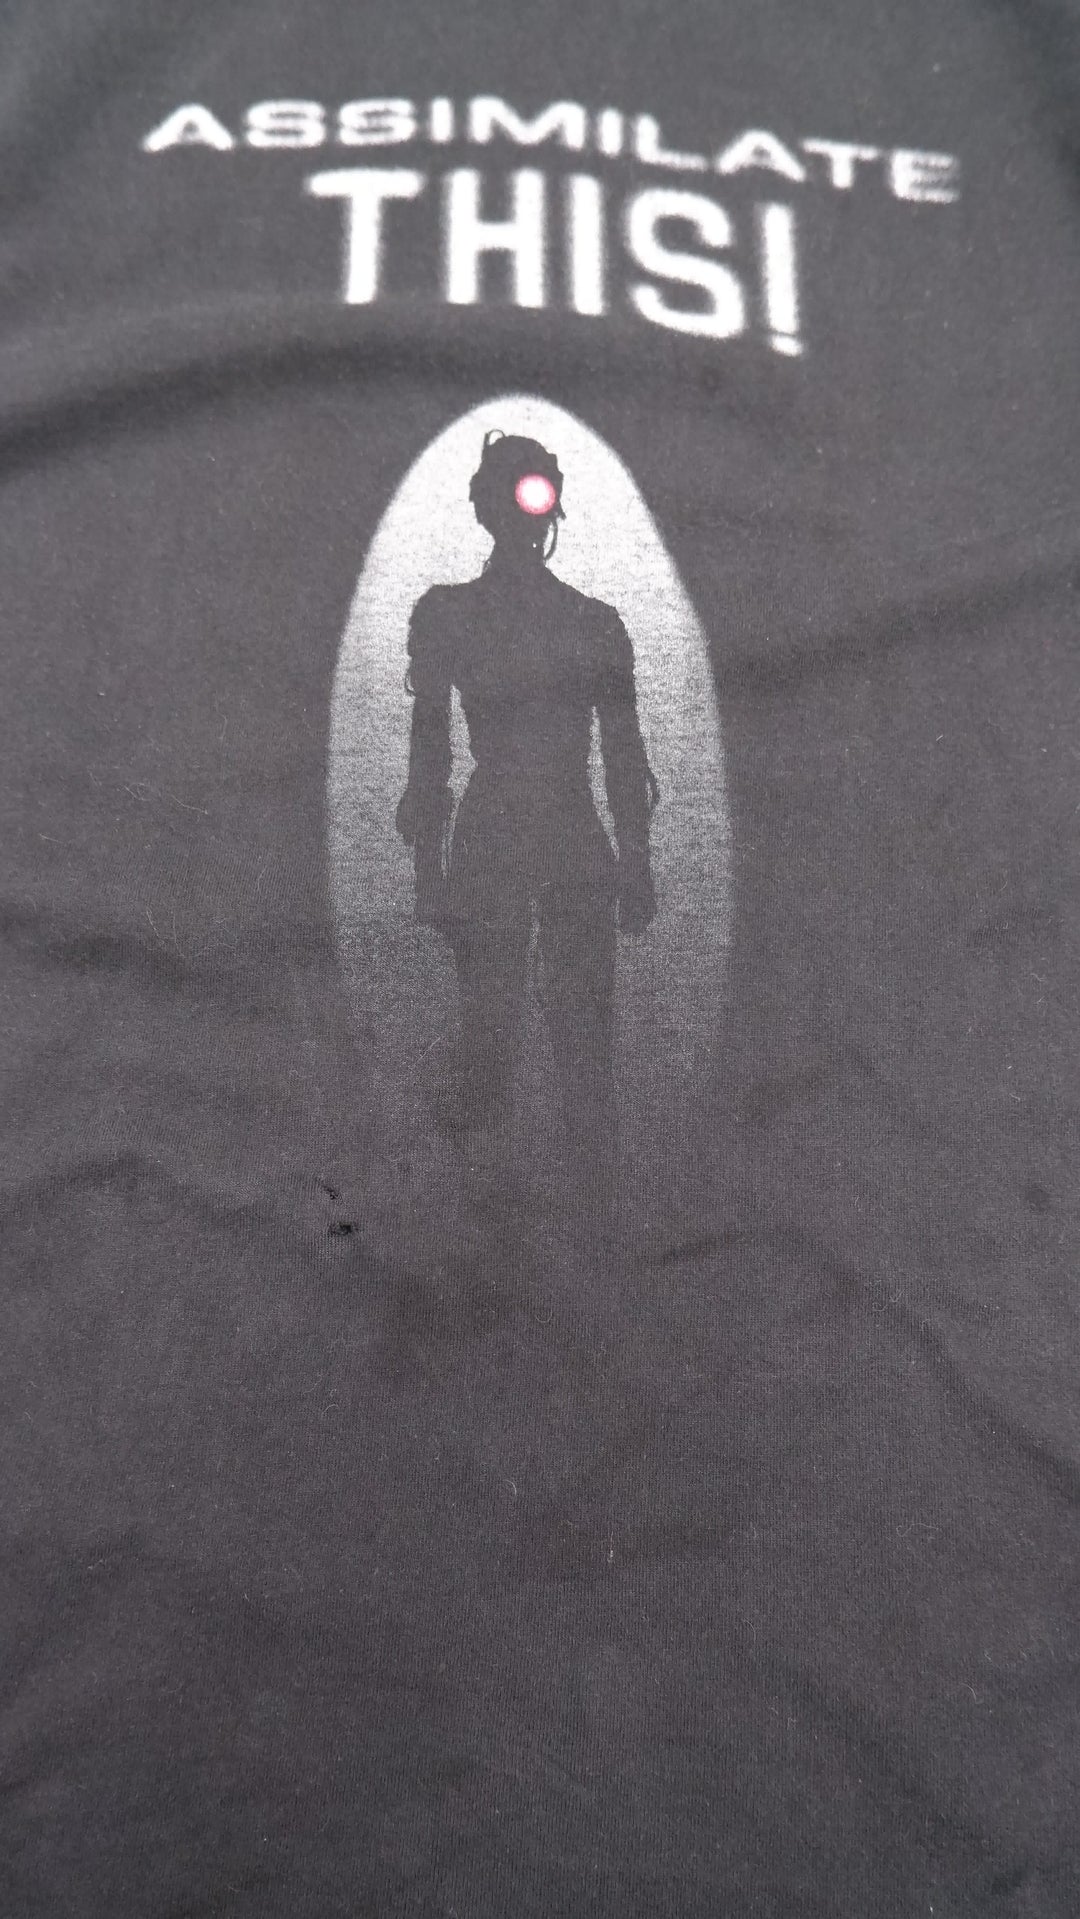 Vintage Star Trek The Experience Hilton Las Vegas' Assimilate This ' T-Shirt Made IN USA